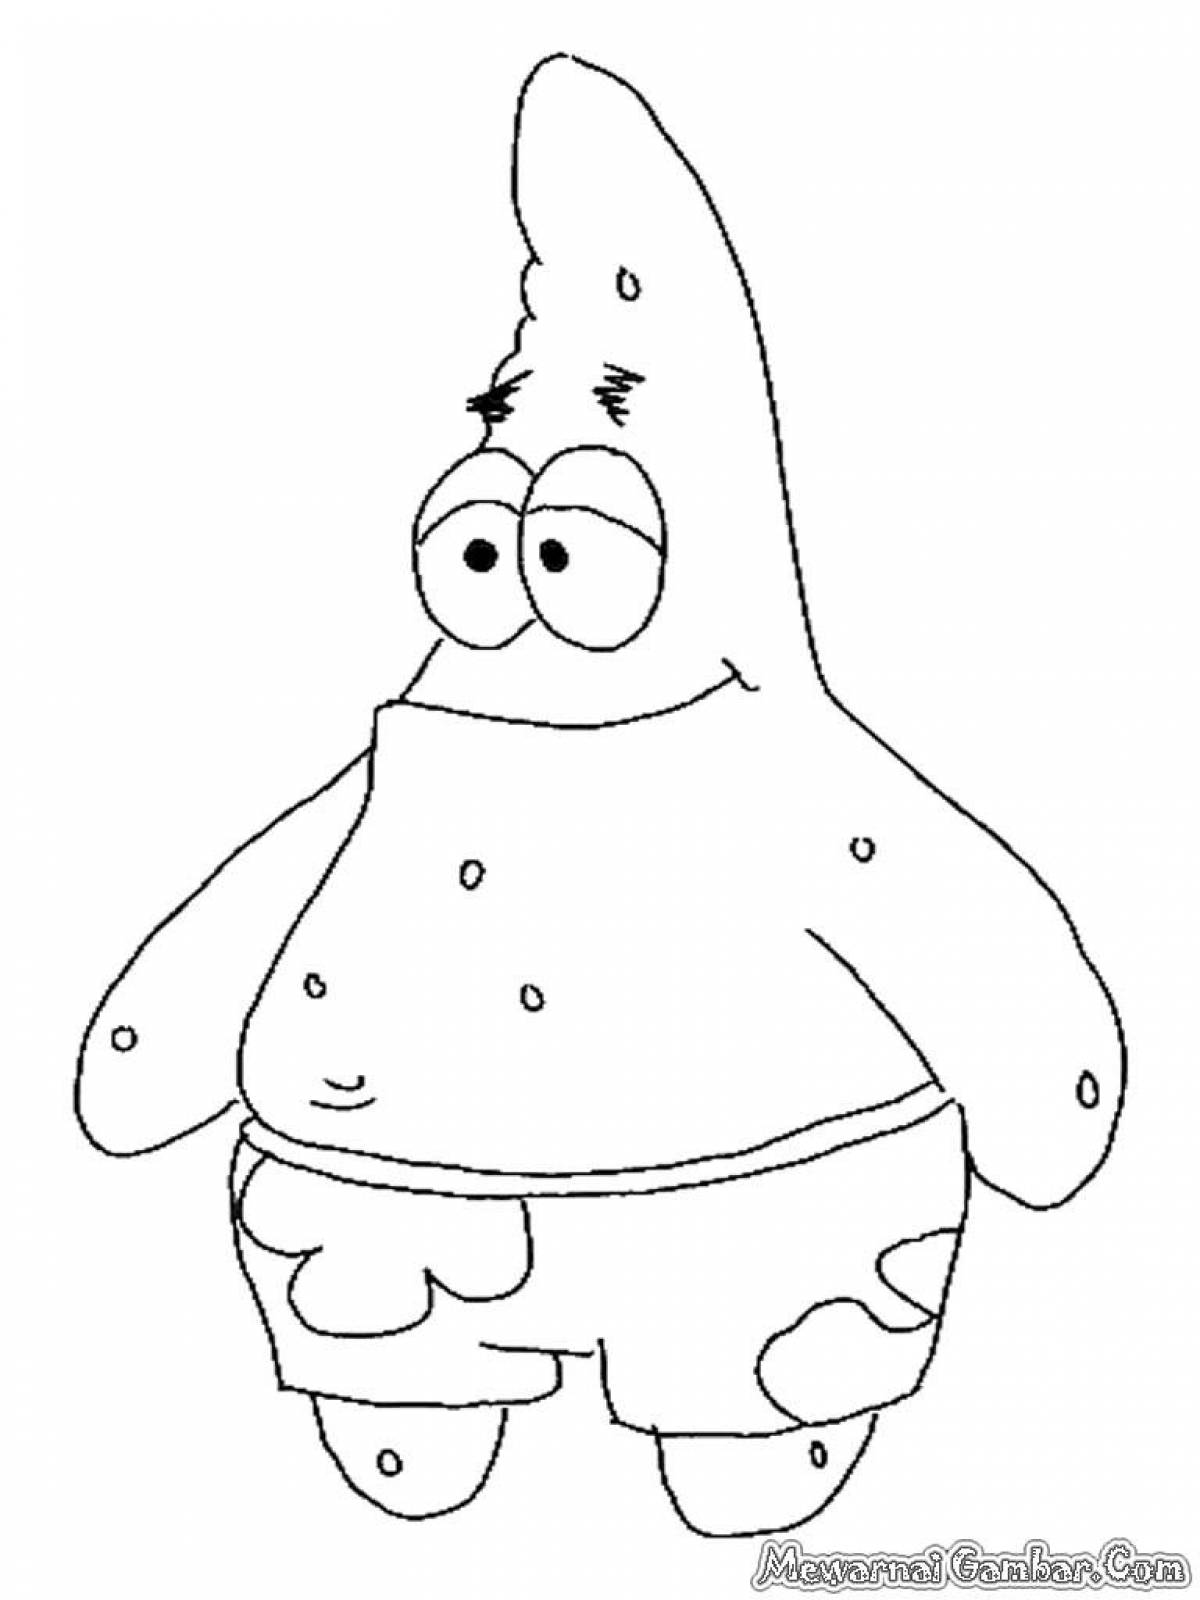 Patrick's dazzling coloring book